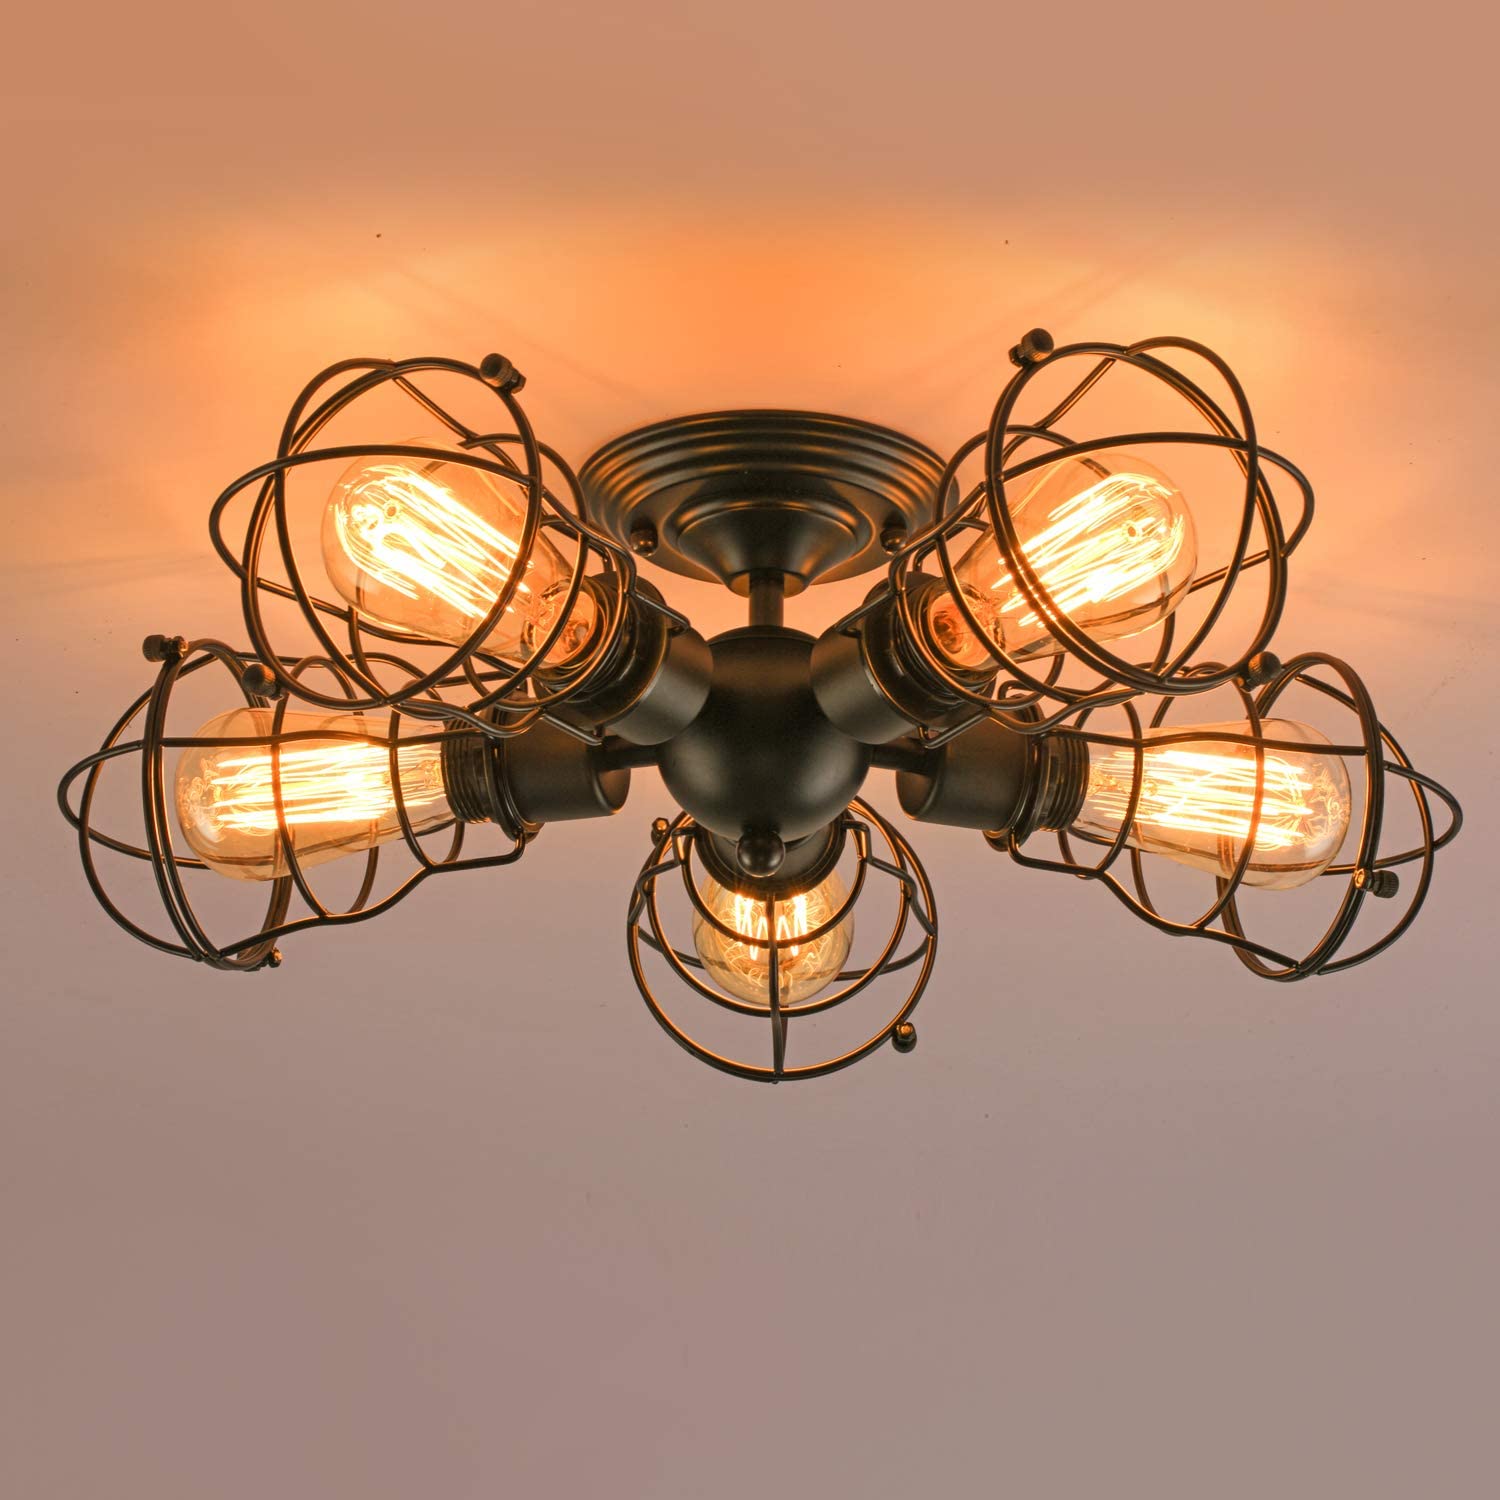 5 light rustic semi flush mount ceiling light industrial wire cage ceiling lamp